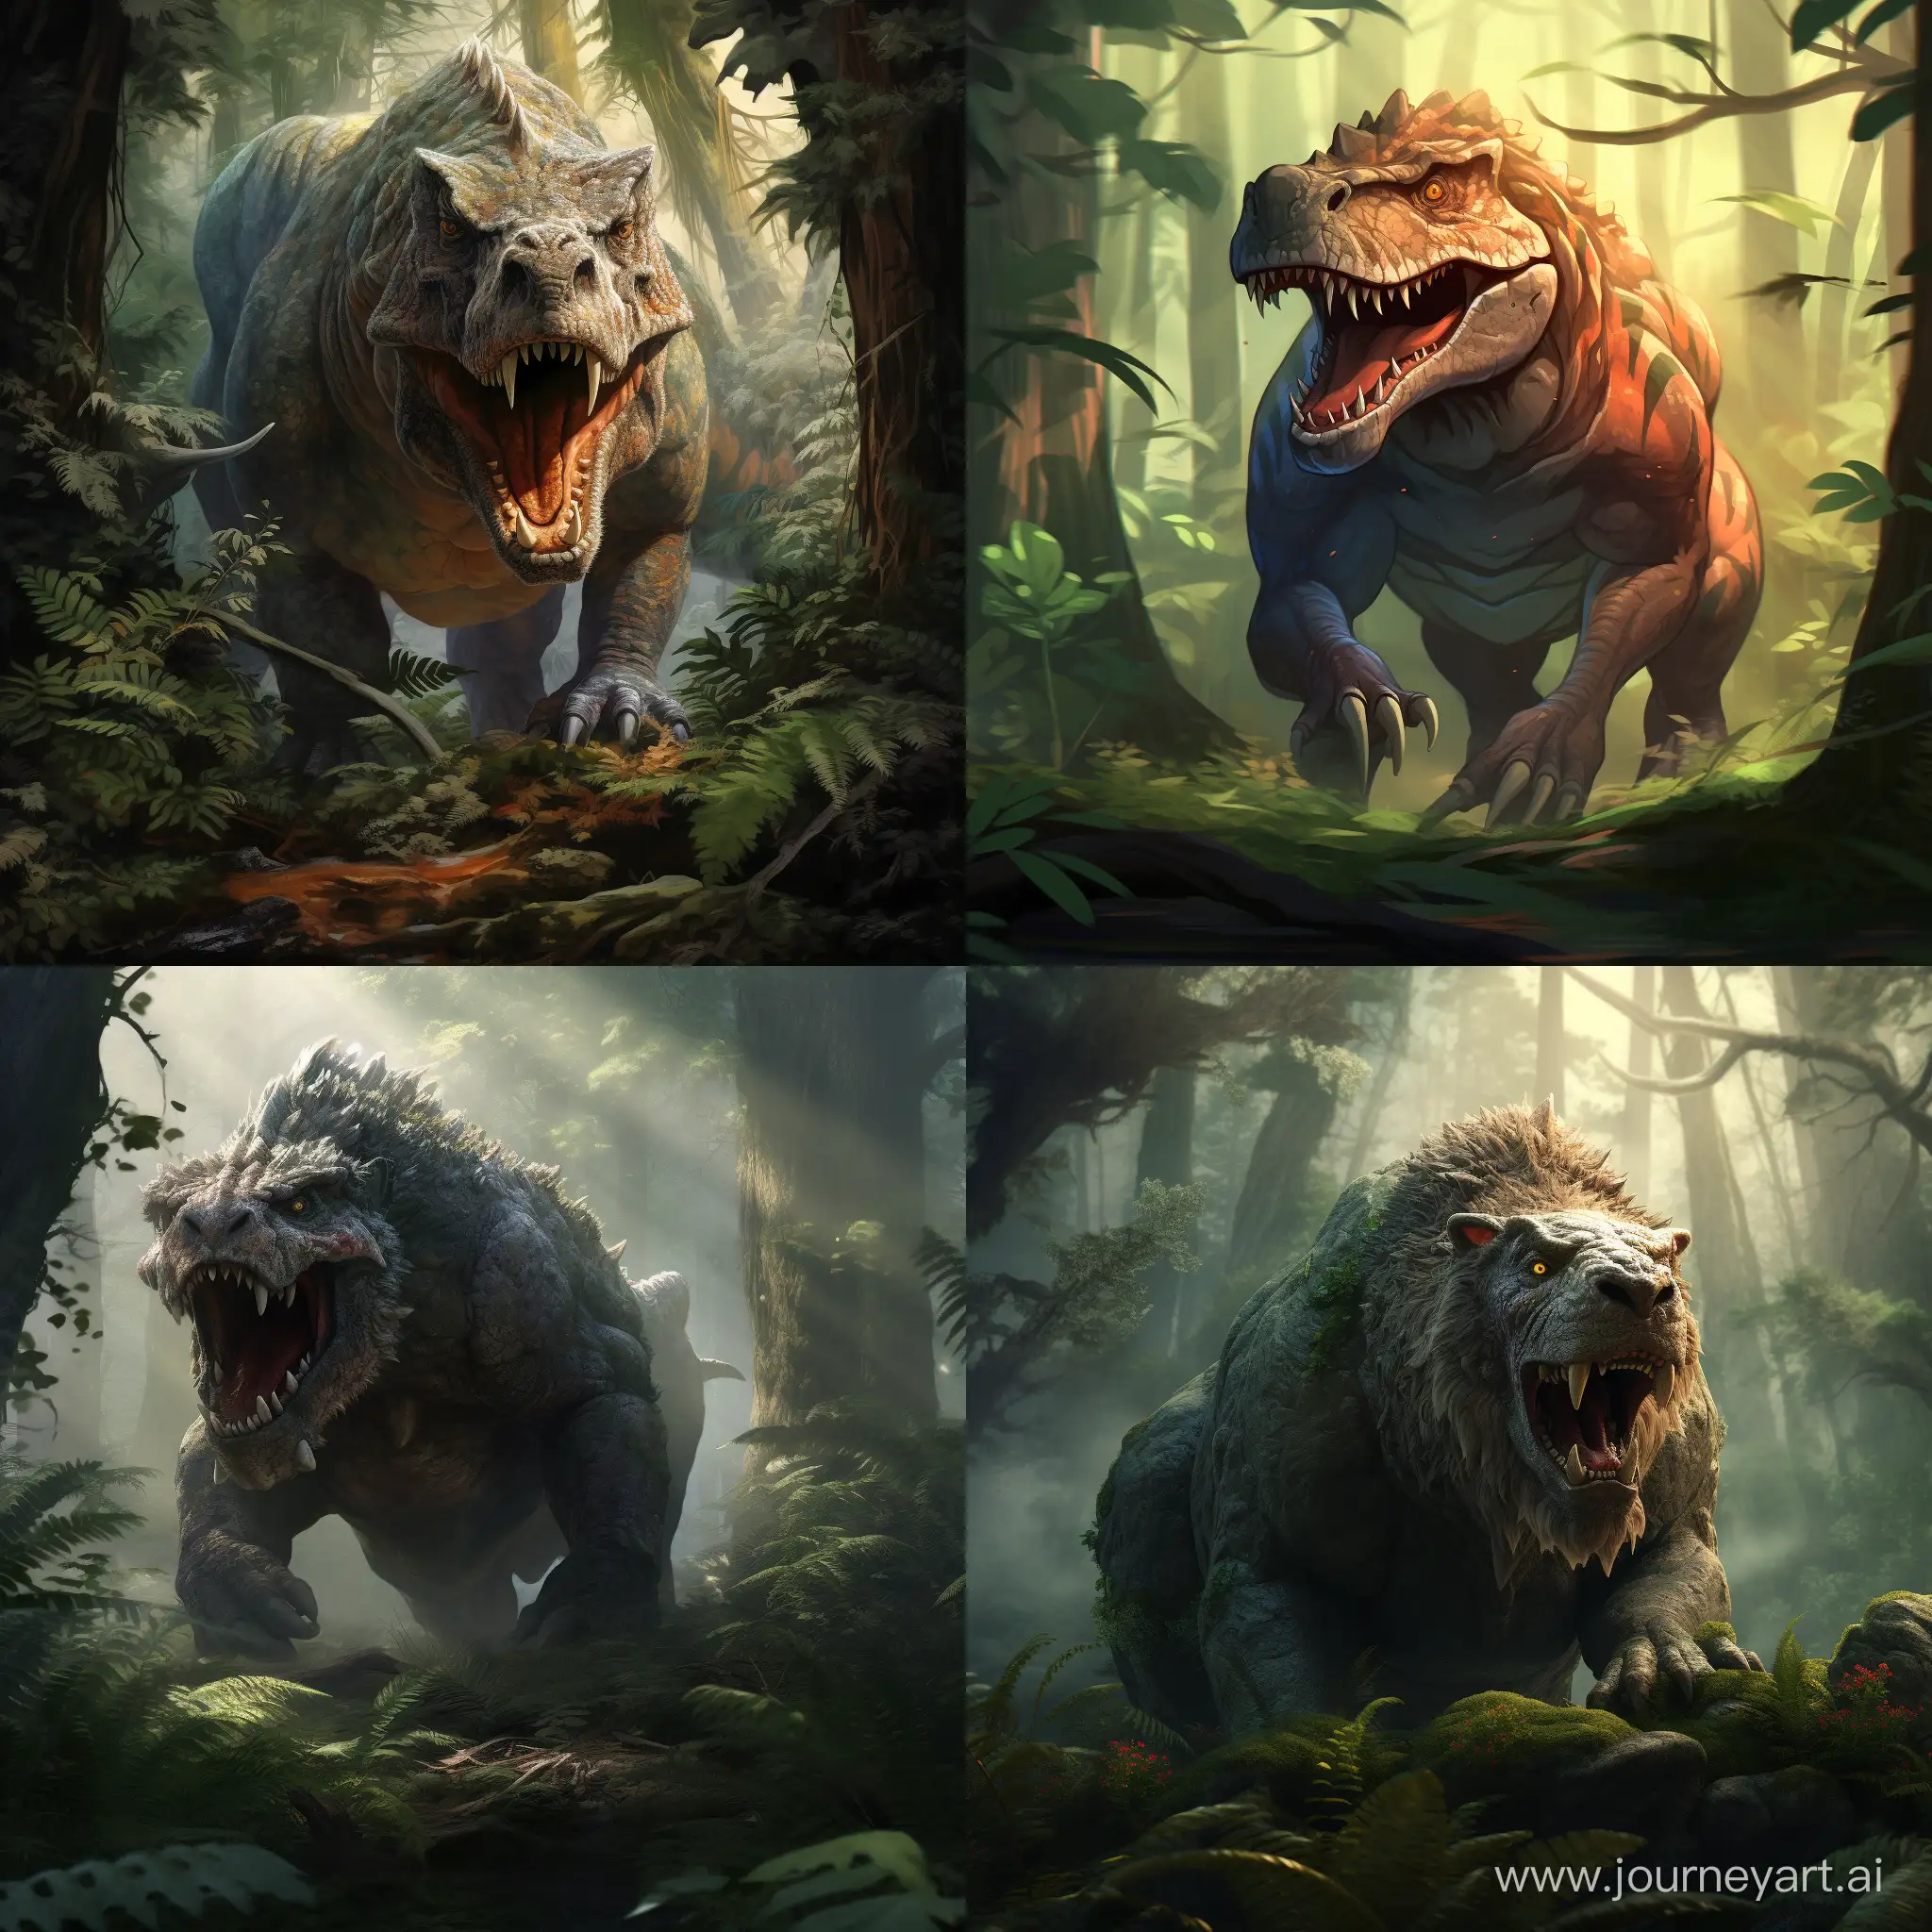 Majestic-Tyrannosaurus-Rex-and-Bear-Encounter-in-Enchanted-Forest